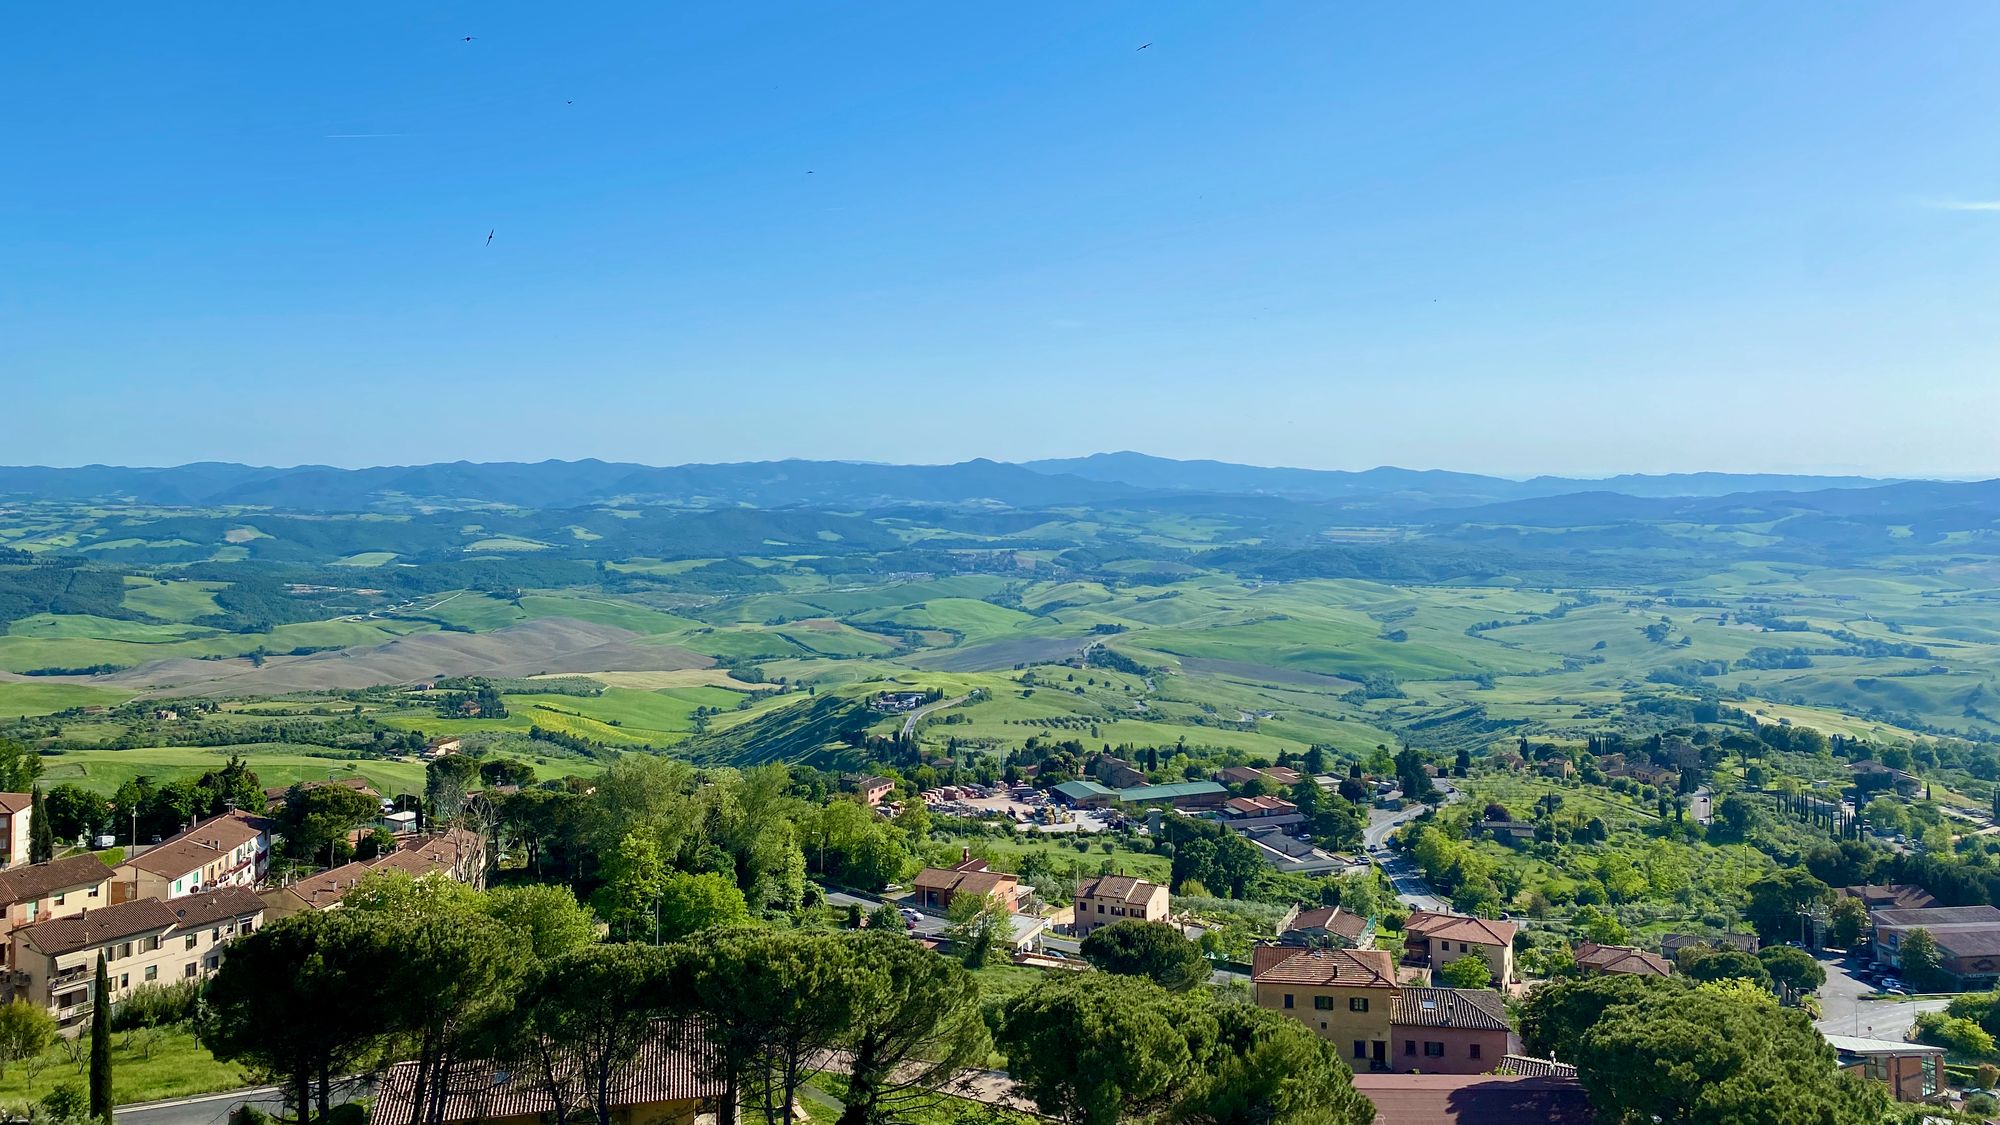 The first road trip part 02: our itinerary in Tuscany while working remote